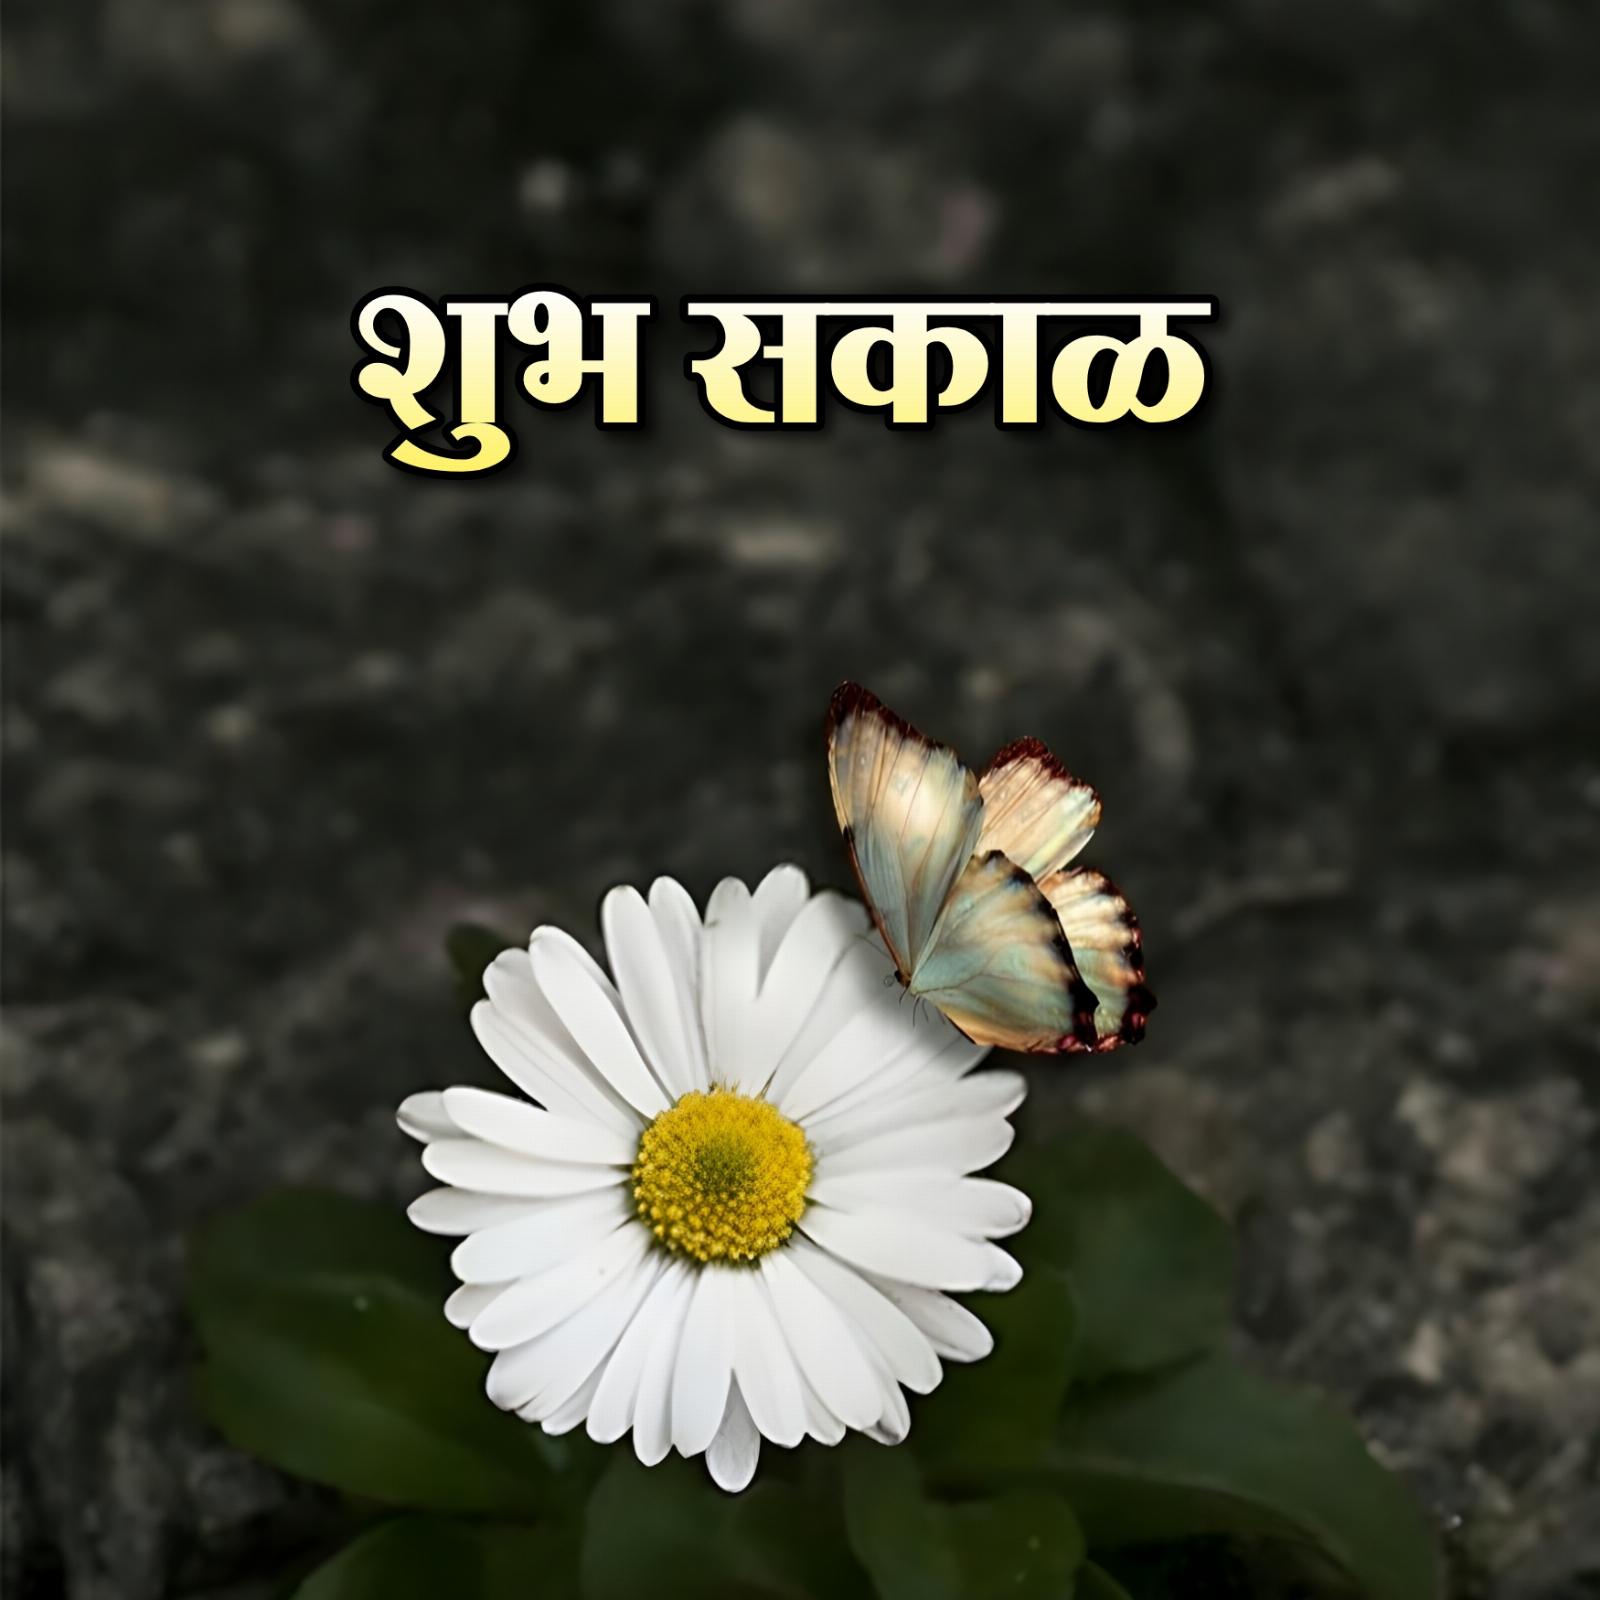 Shubh Sakal With Flower And Butterfly Images